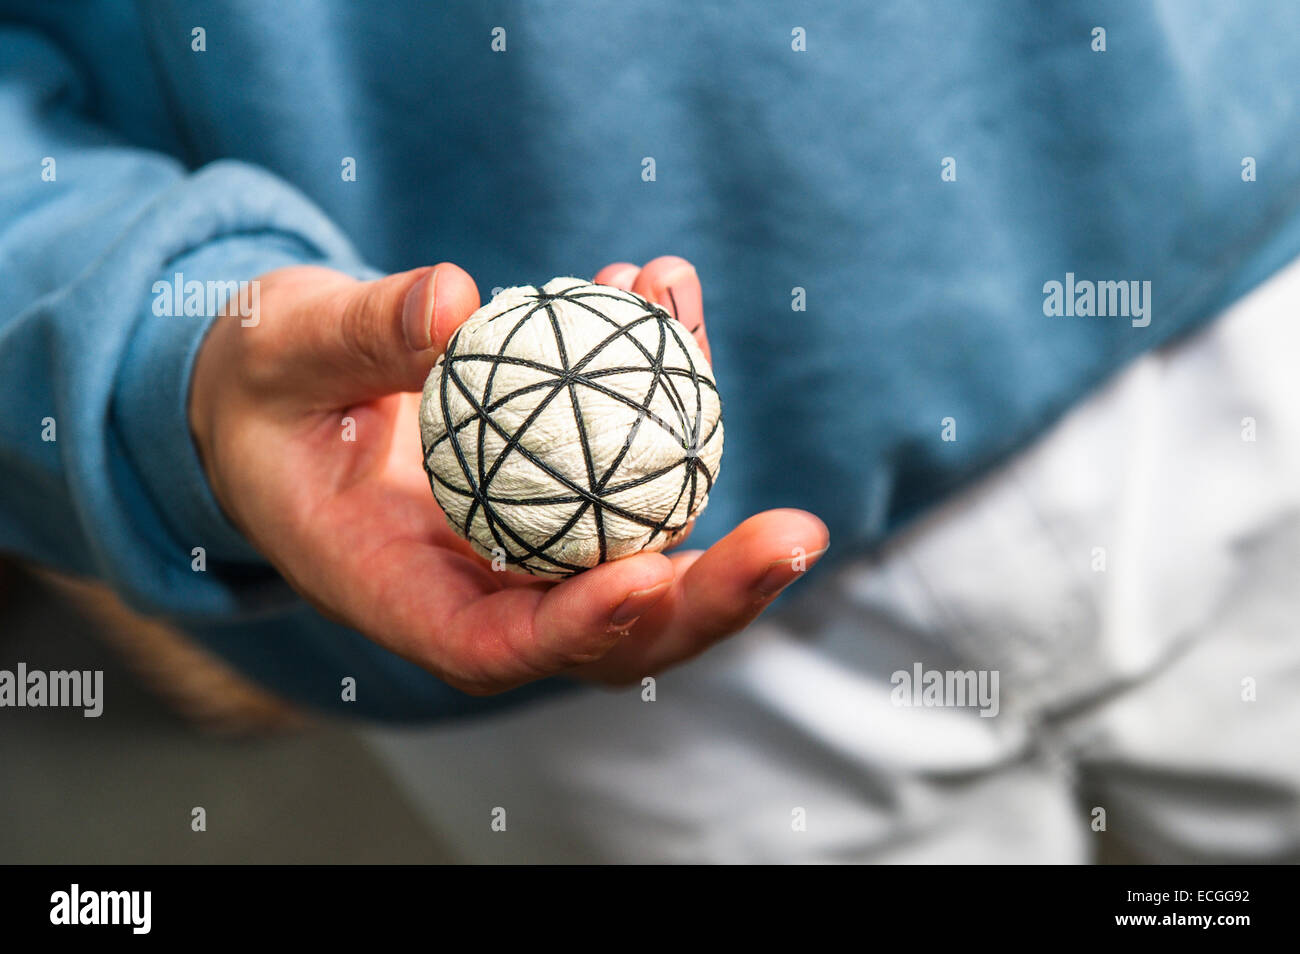 A Real Tennis ball being manufactured Stock Photo - Alamy